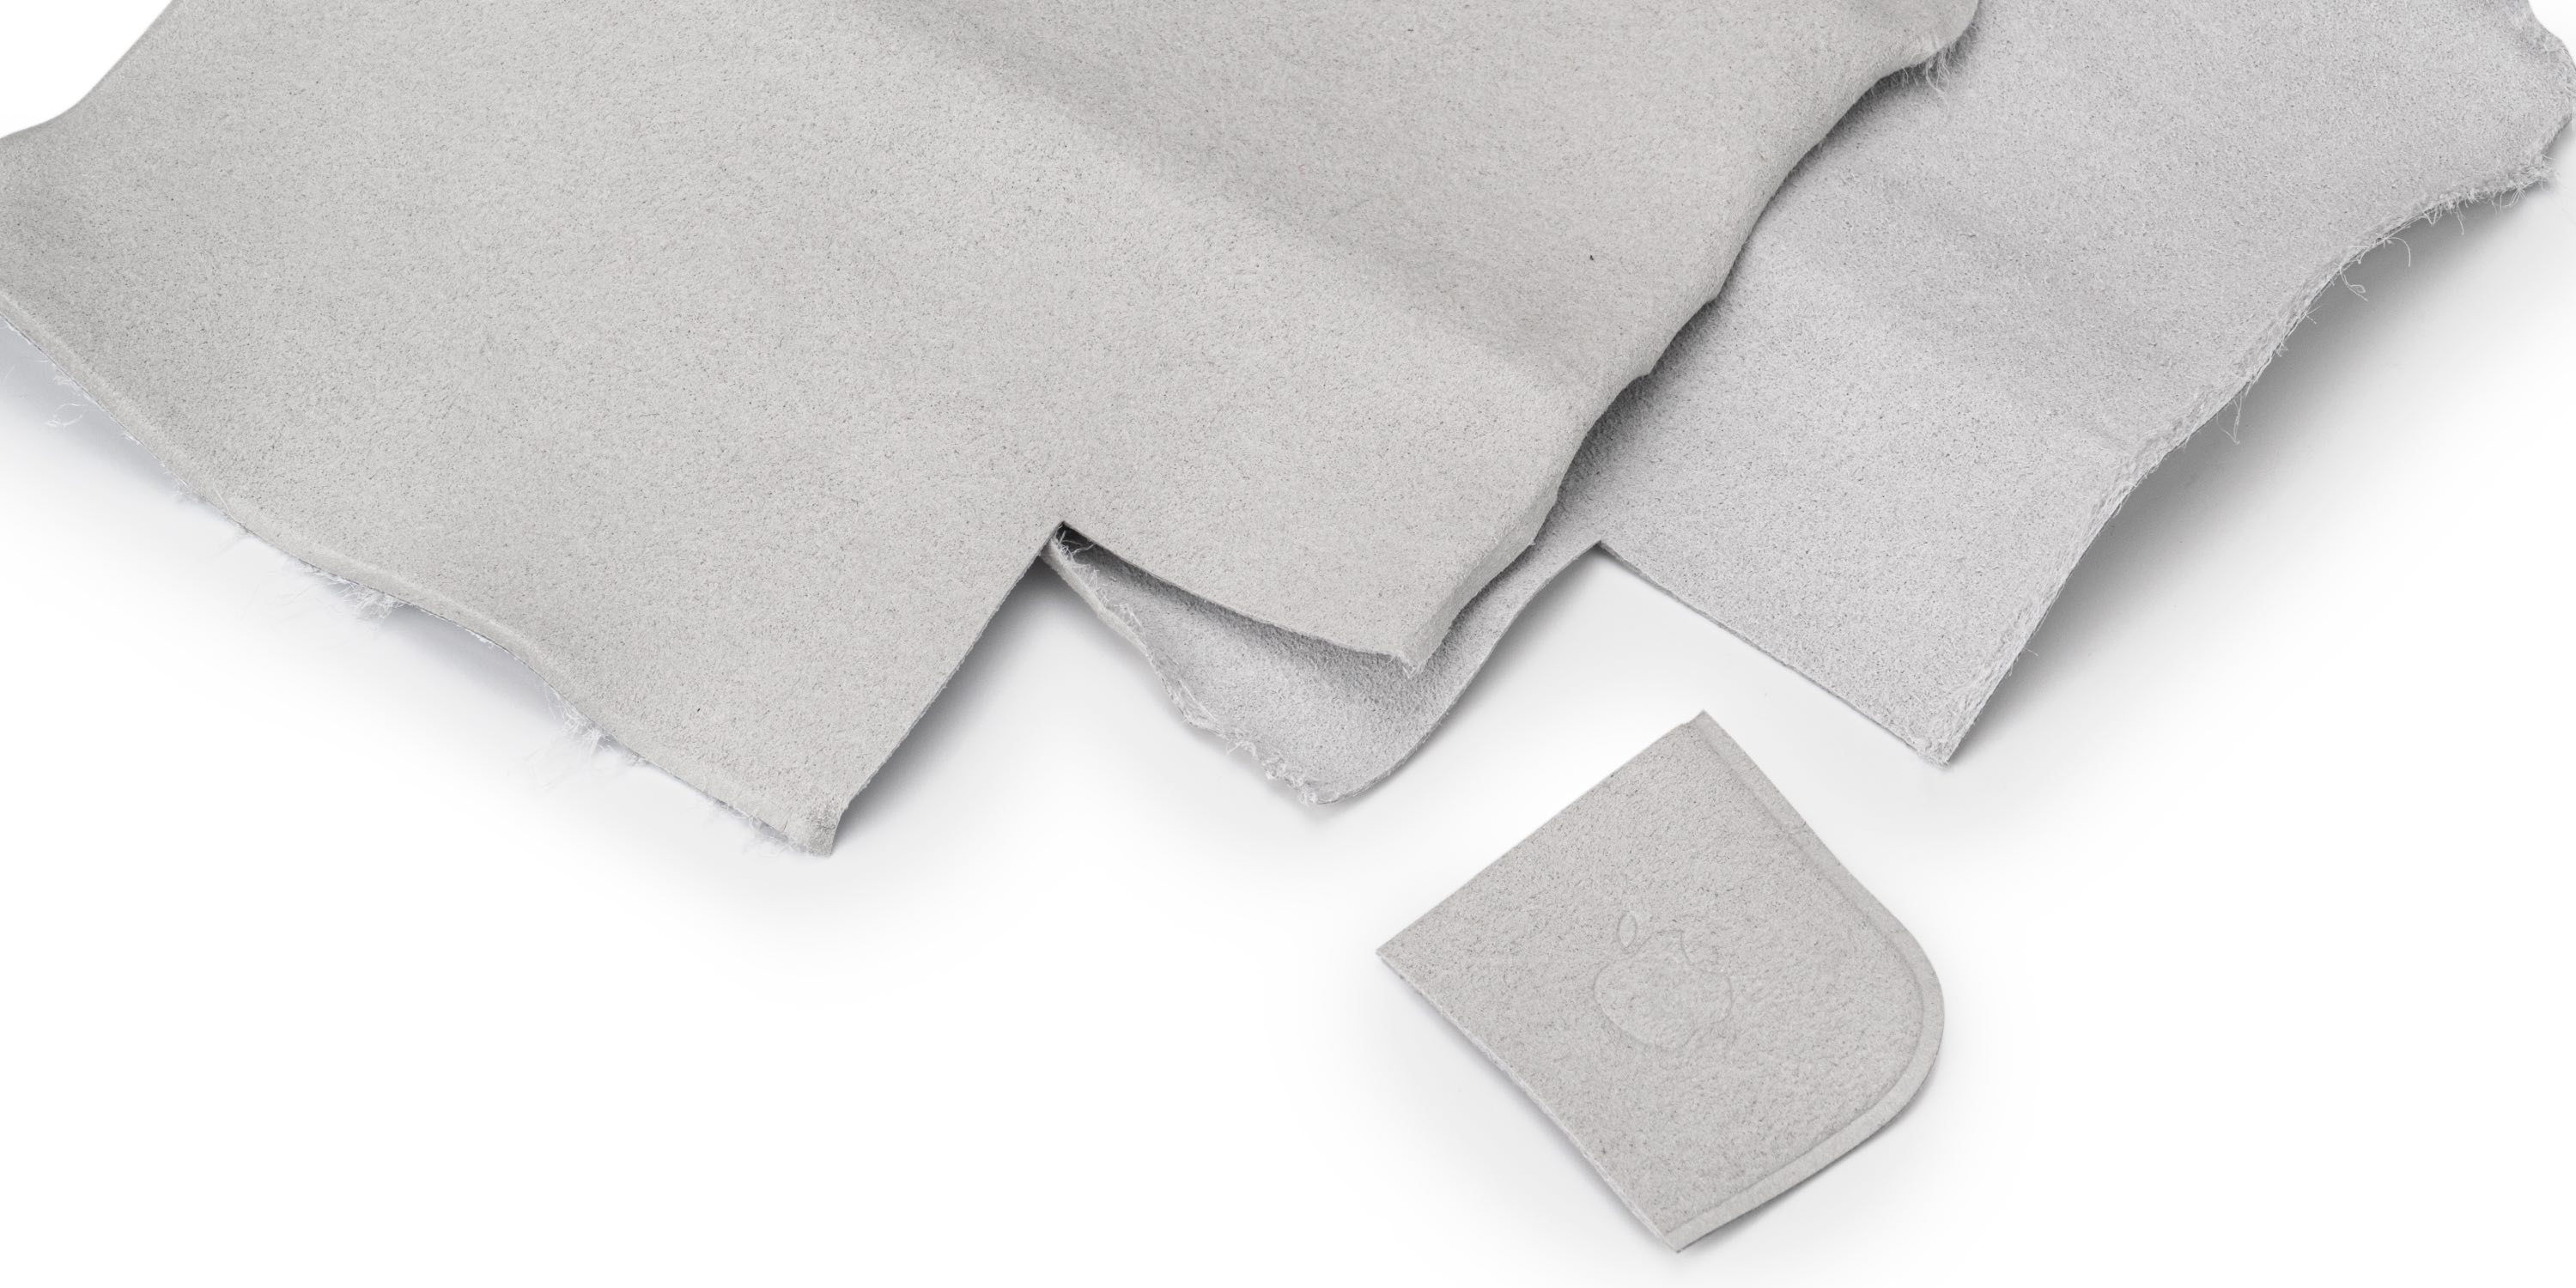 iFixit 'tears down' Apple Polishing Cloth to reveal why Apple